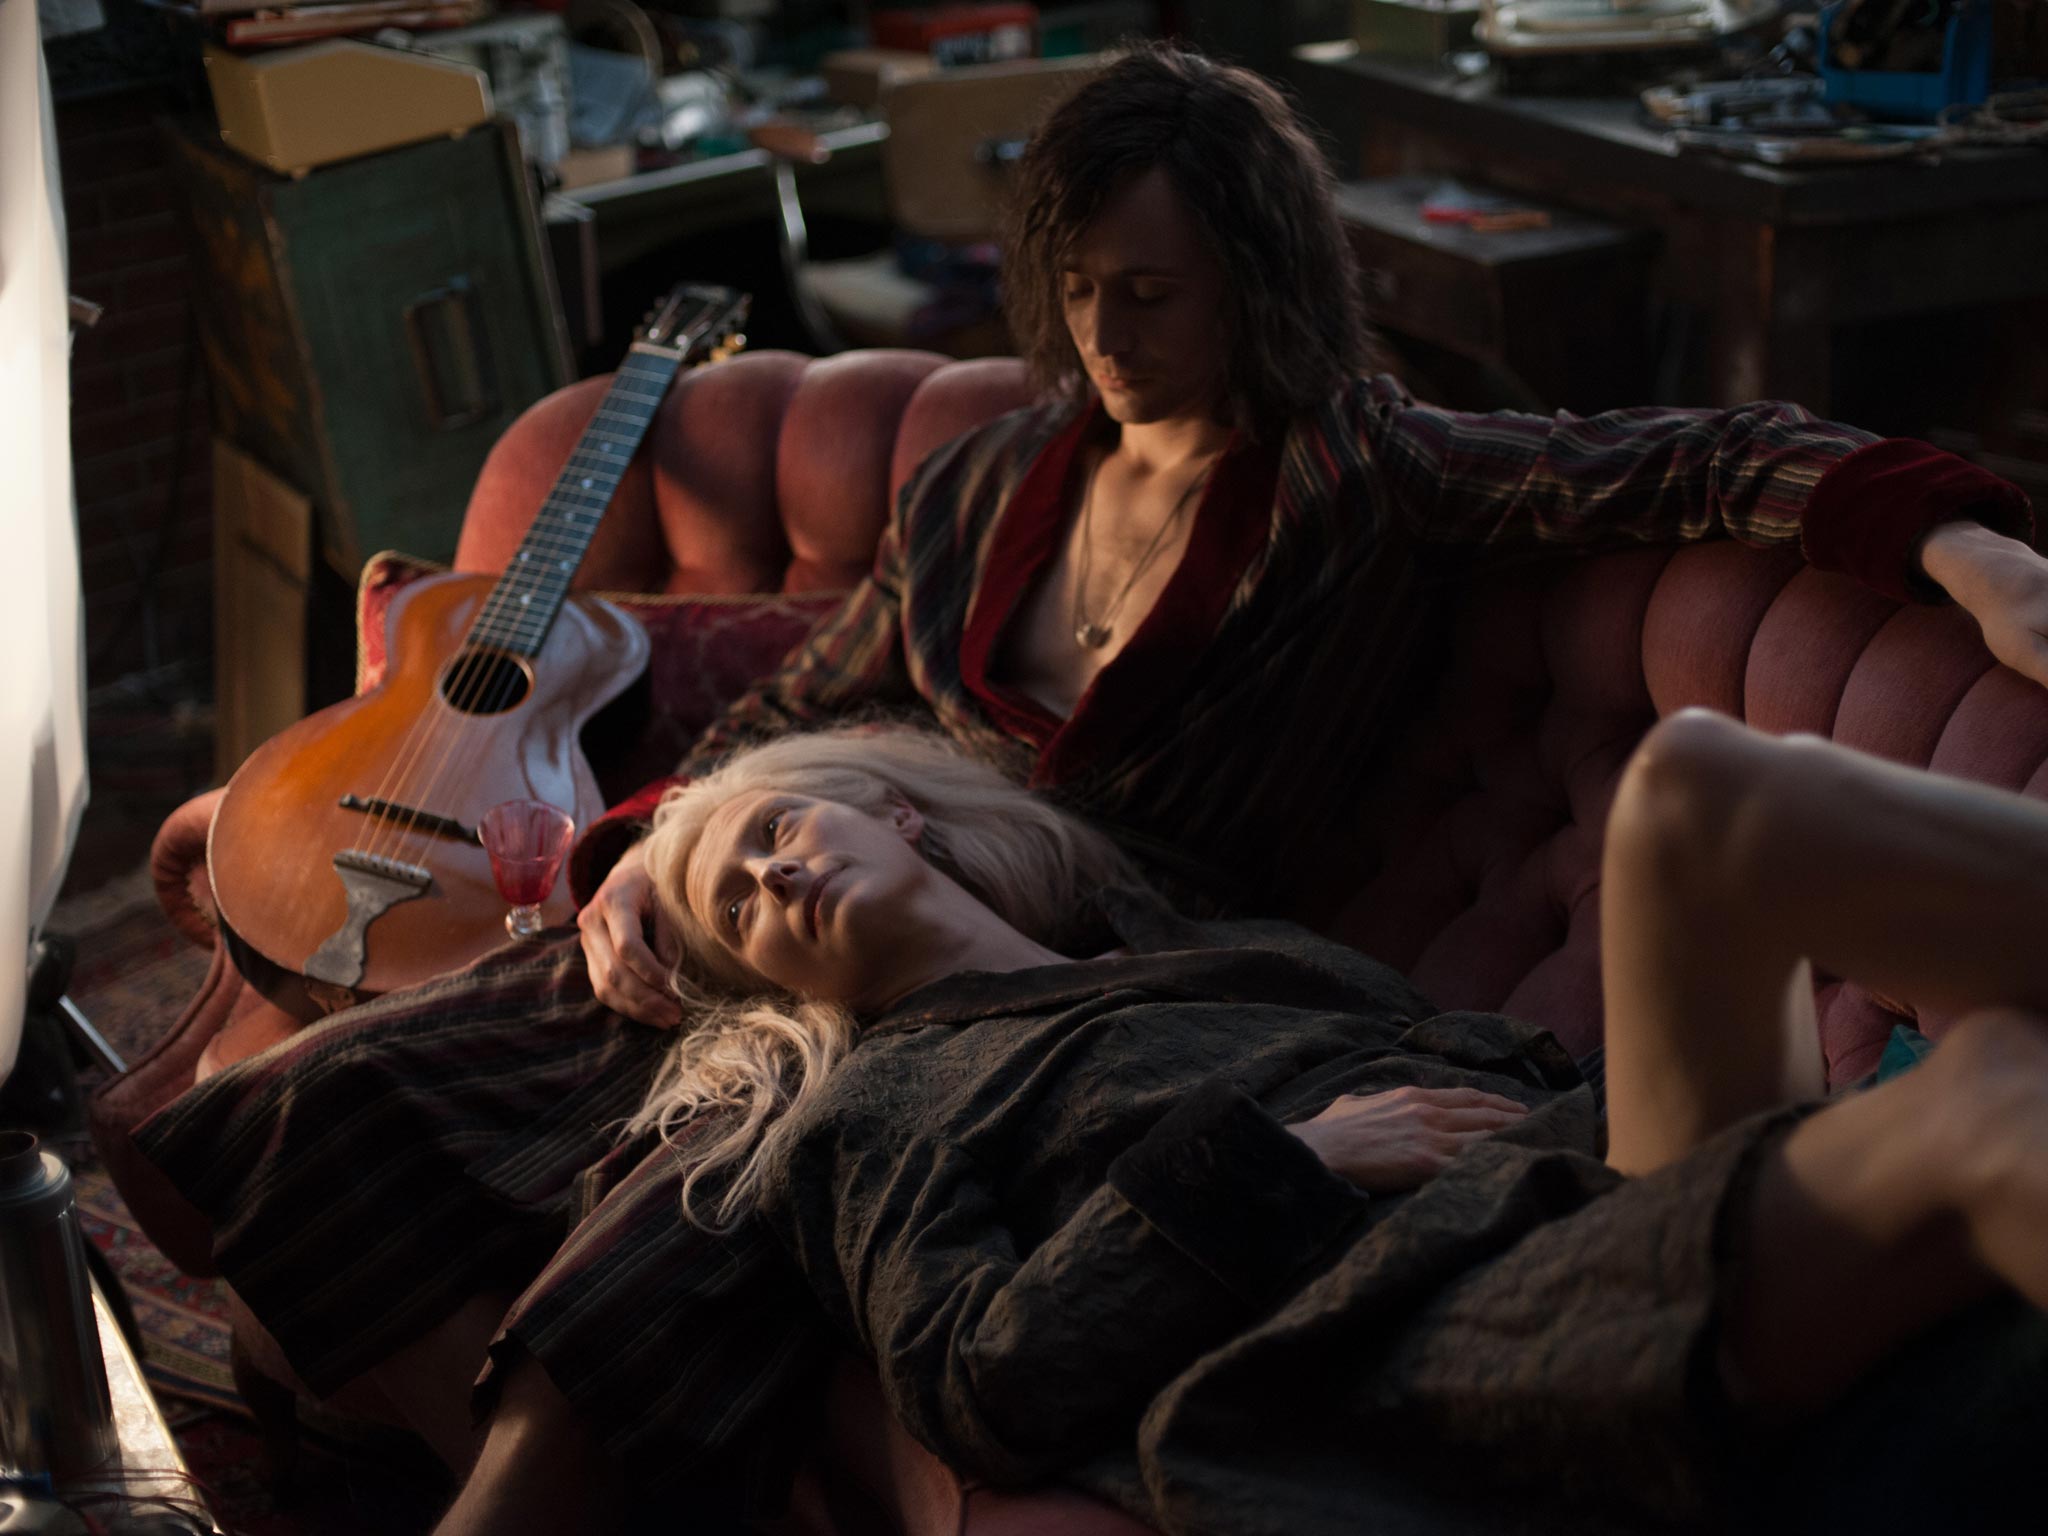 Dead cool: Tilda Swinton and Tom Hiddleston in ‘Only Lovers Left Alive’